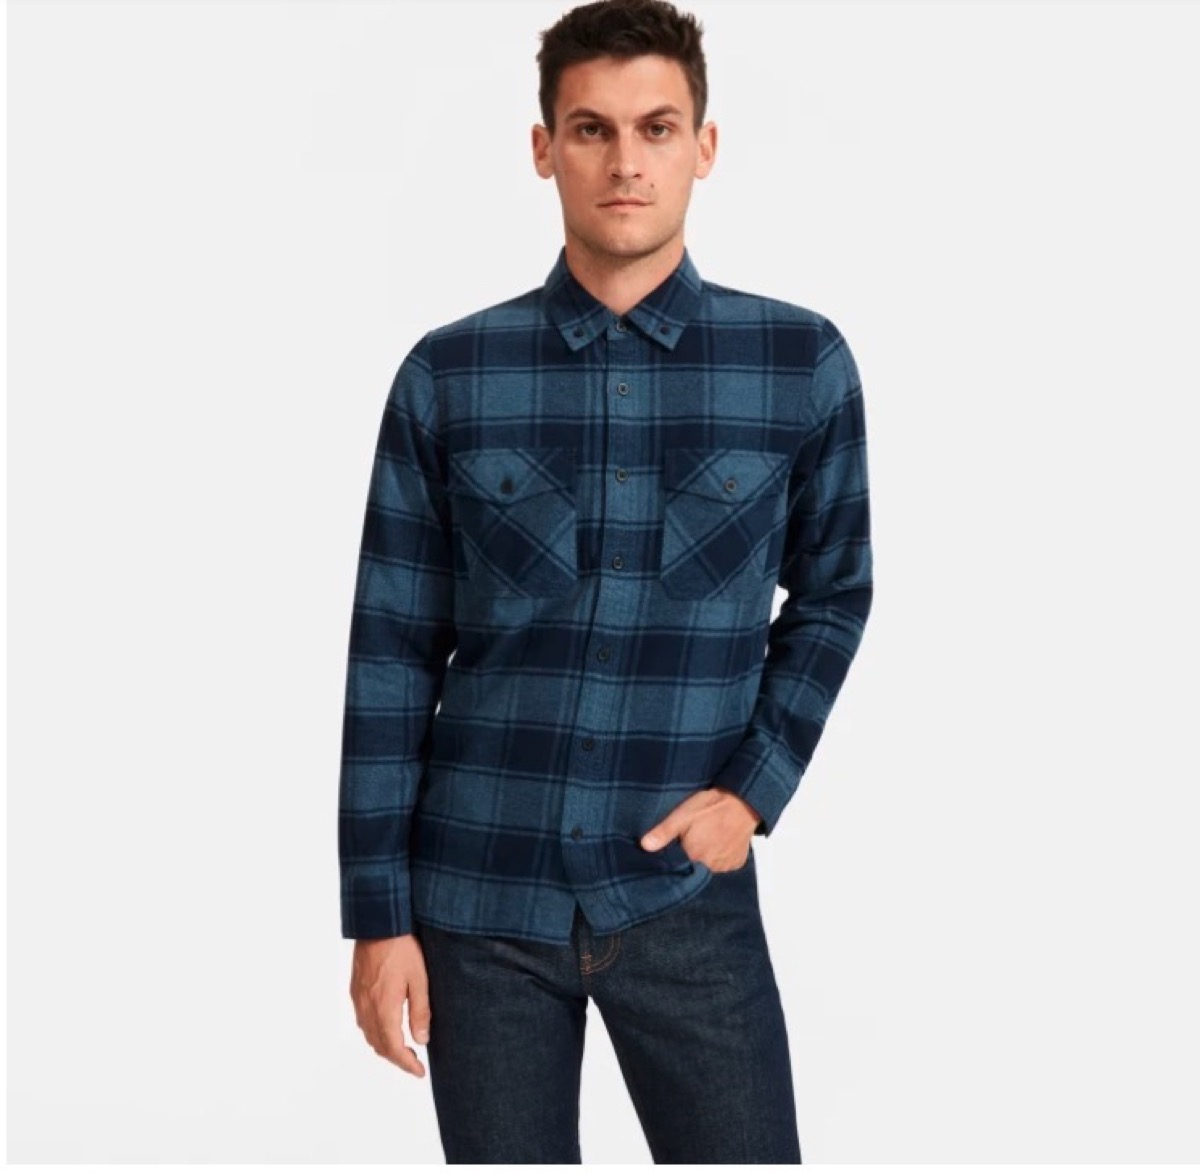 young man in blue flannel plaid shirt